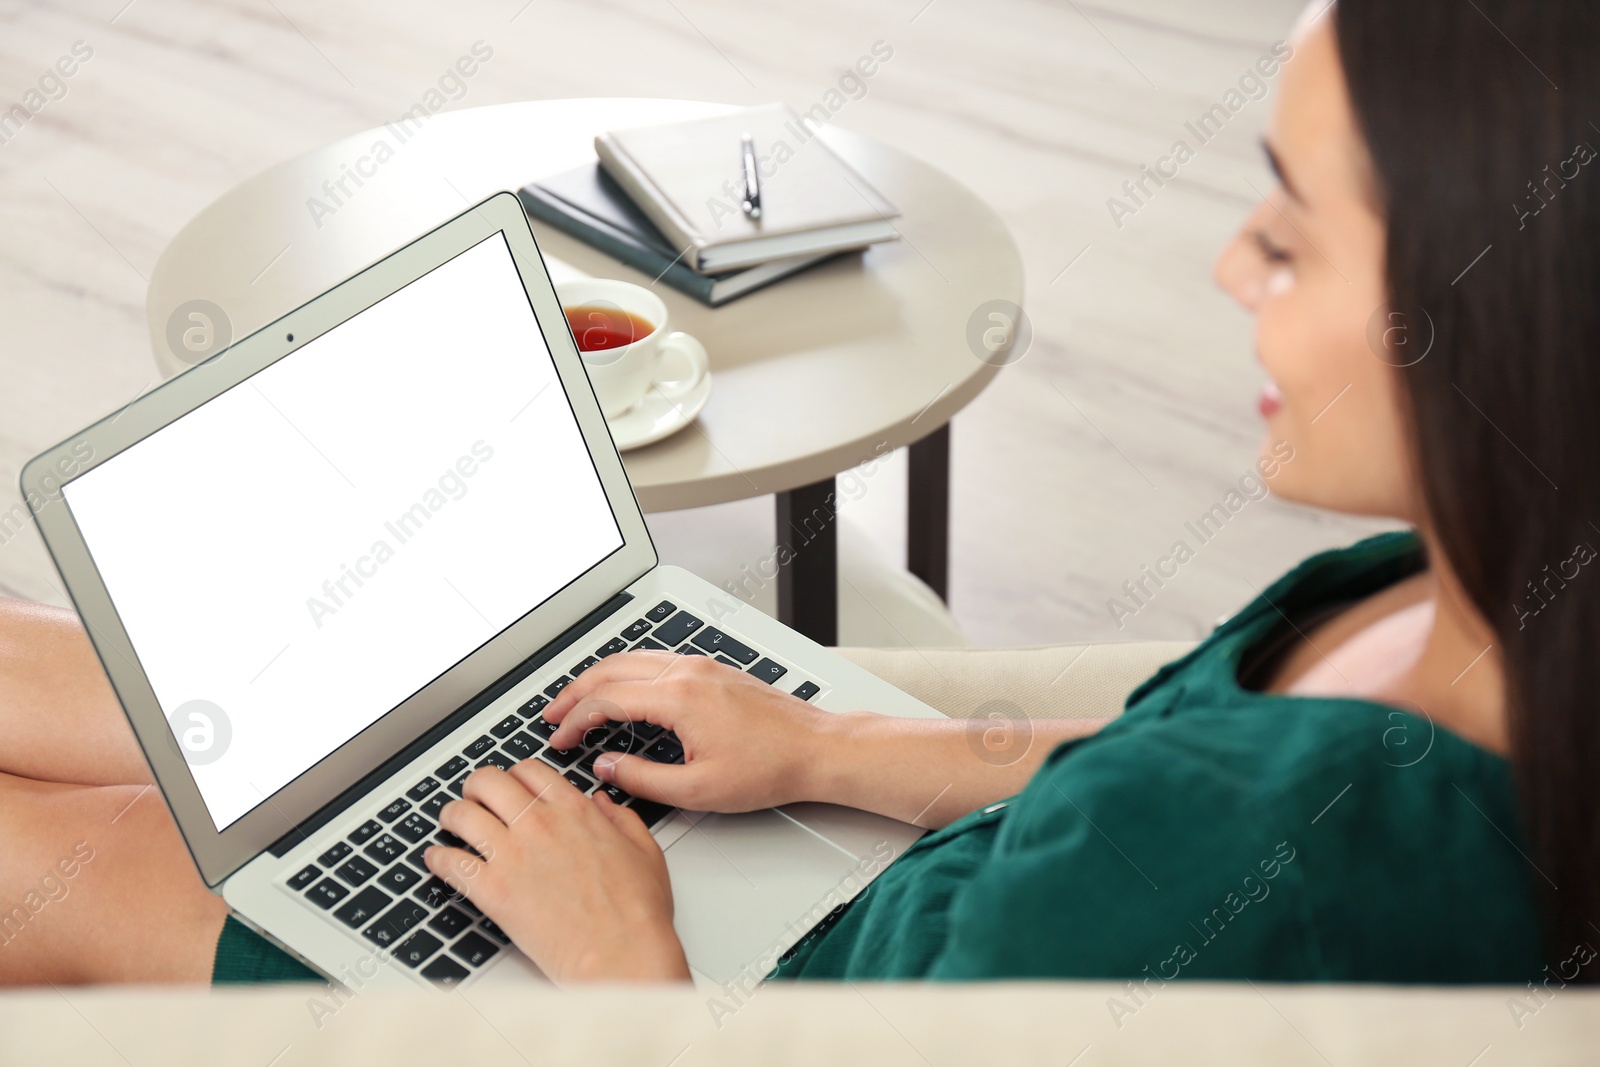 Photo of Young woman working on laptop in living room, focus on hands. Home office concept